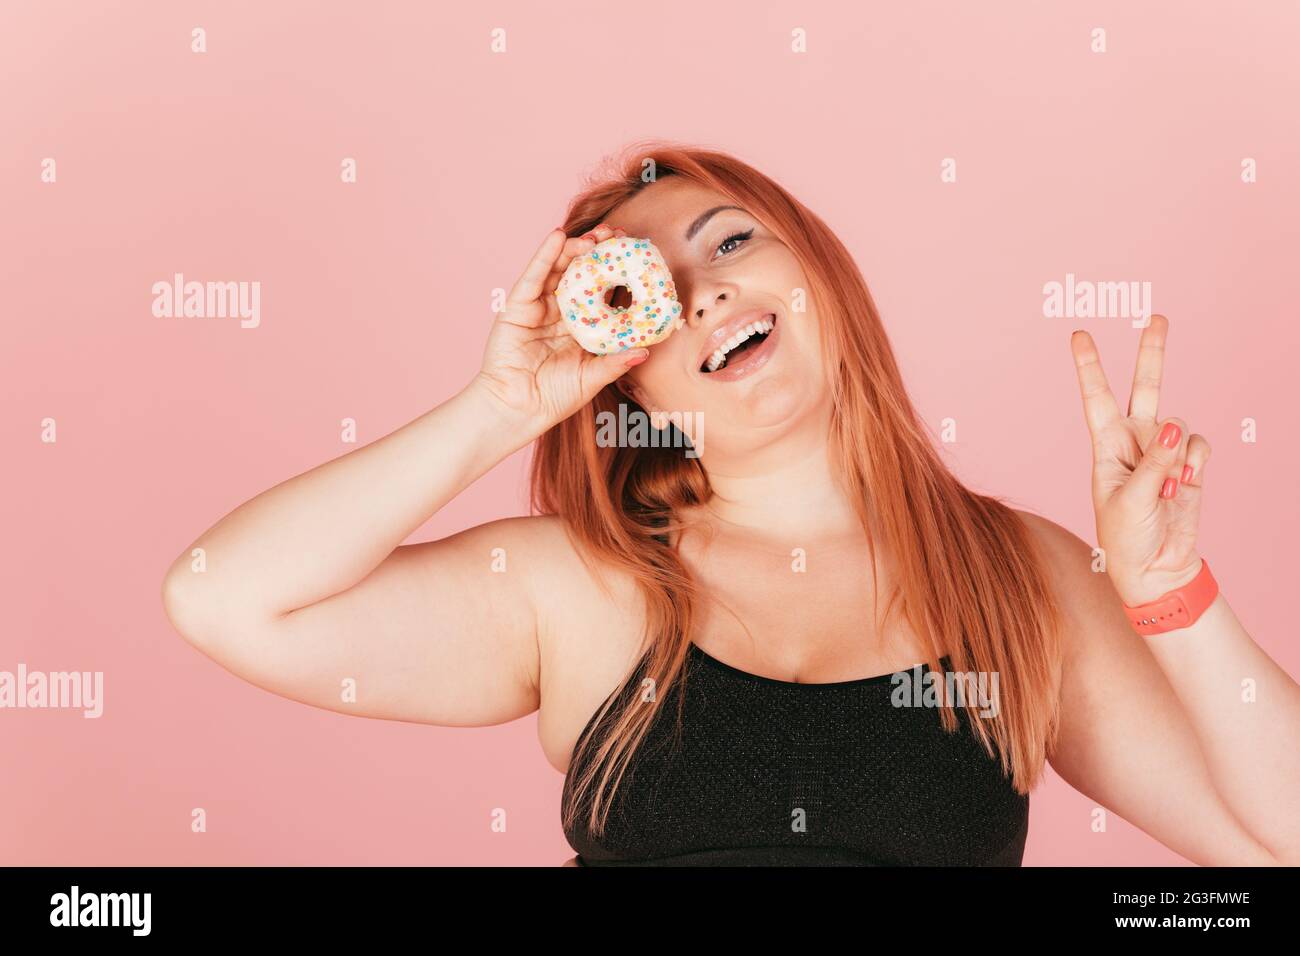 Joyful oversized young woman laughs holding dessert donut near her eye and shows peace gesture while standing on pink background. Stock Photo